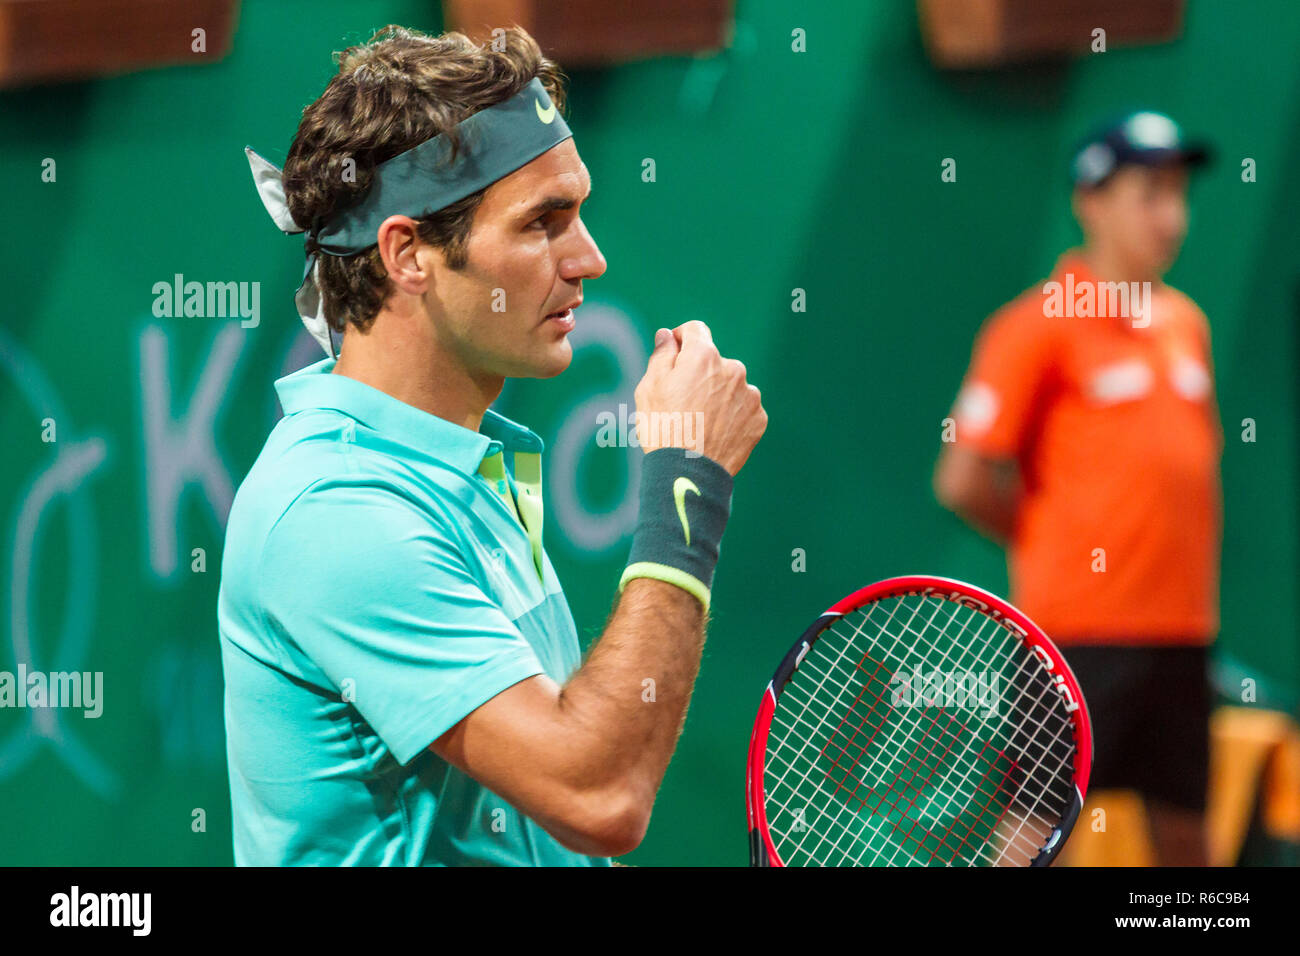 Roger Federer at Garanti Koza, Istanbul Open in Turkey 2015. Playing on  clay court tennis Stock Photo - Alamy